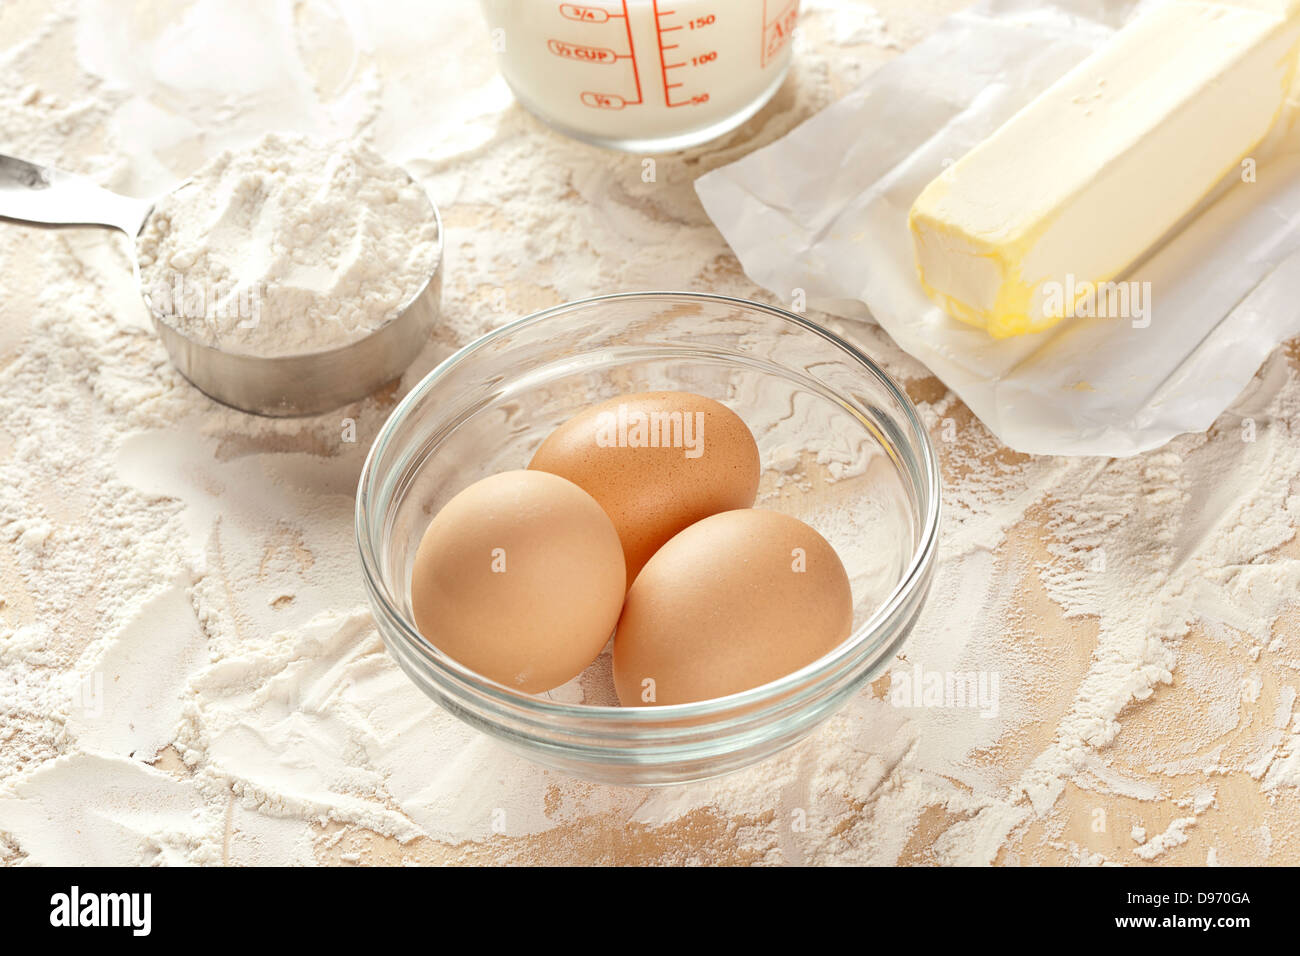 Baking ingredients including egg, flour, butter, and milk Stock Photo